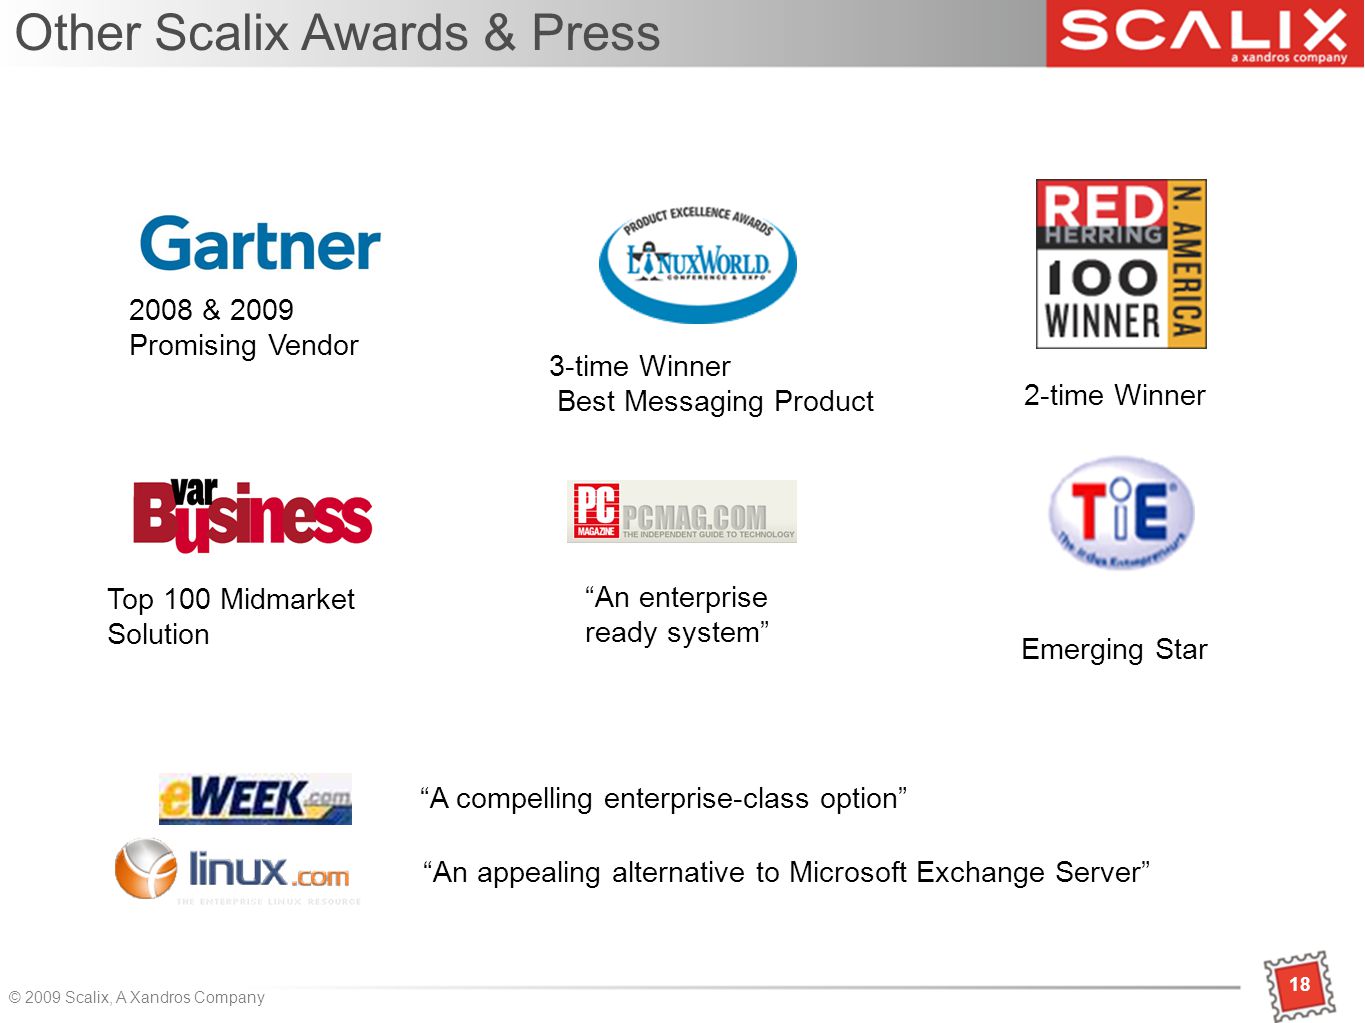 18 © 2009 Scalix, A Xandros Company 18 Other Scalix Awards & Press Emerging Star 2008 & 2009 Promising Vendor Top 100 Midmarket Solution 3-time Winner Best Messaging Product 2-time Winner A compelling enterprise-class option An enterprise ready system An appealing alternative to Microsoft Exchange Server